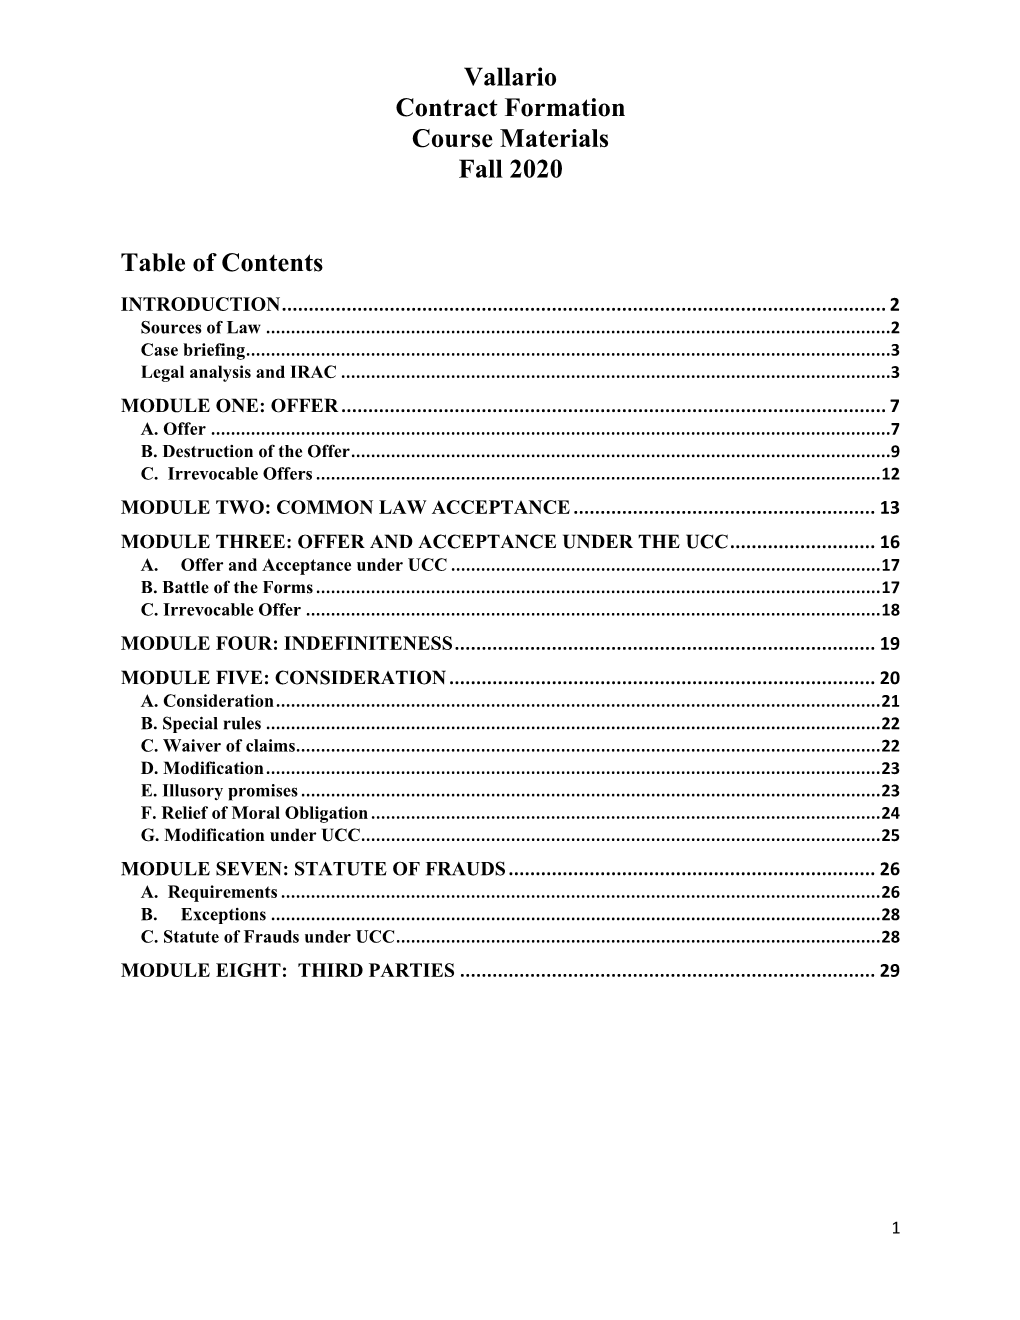 Vallario Contract Formation Course Materials Fall 2020 Table of Contents